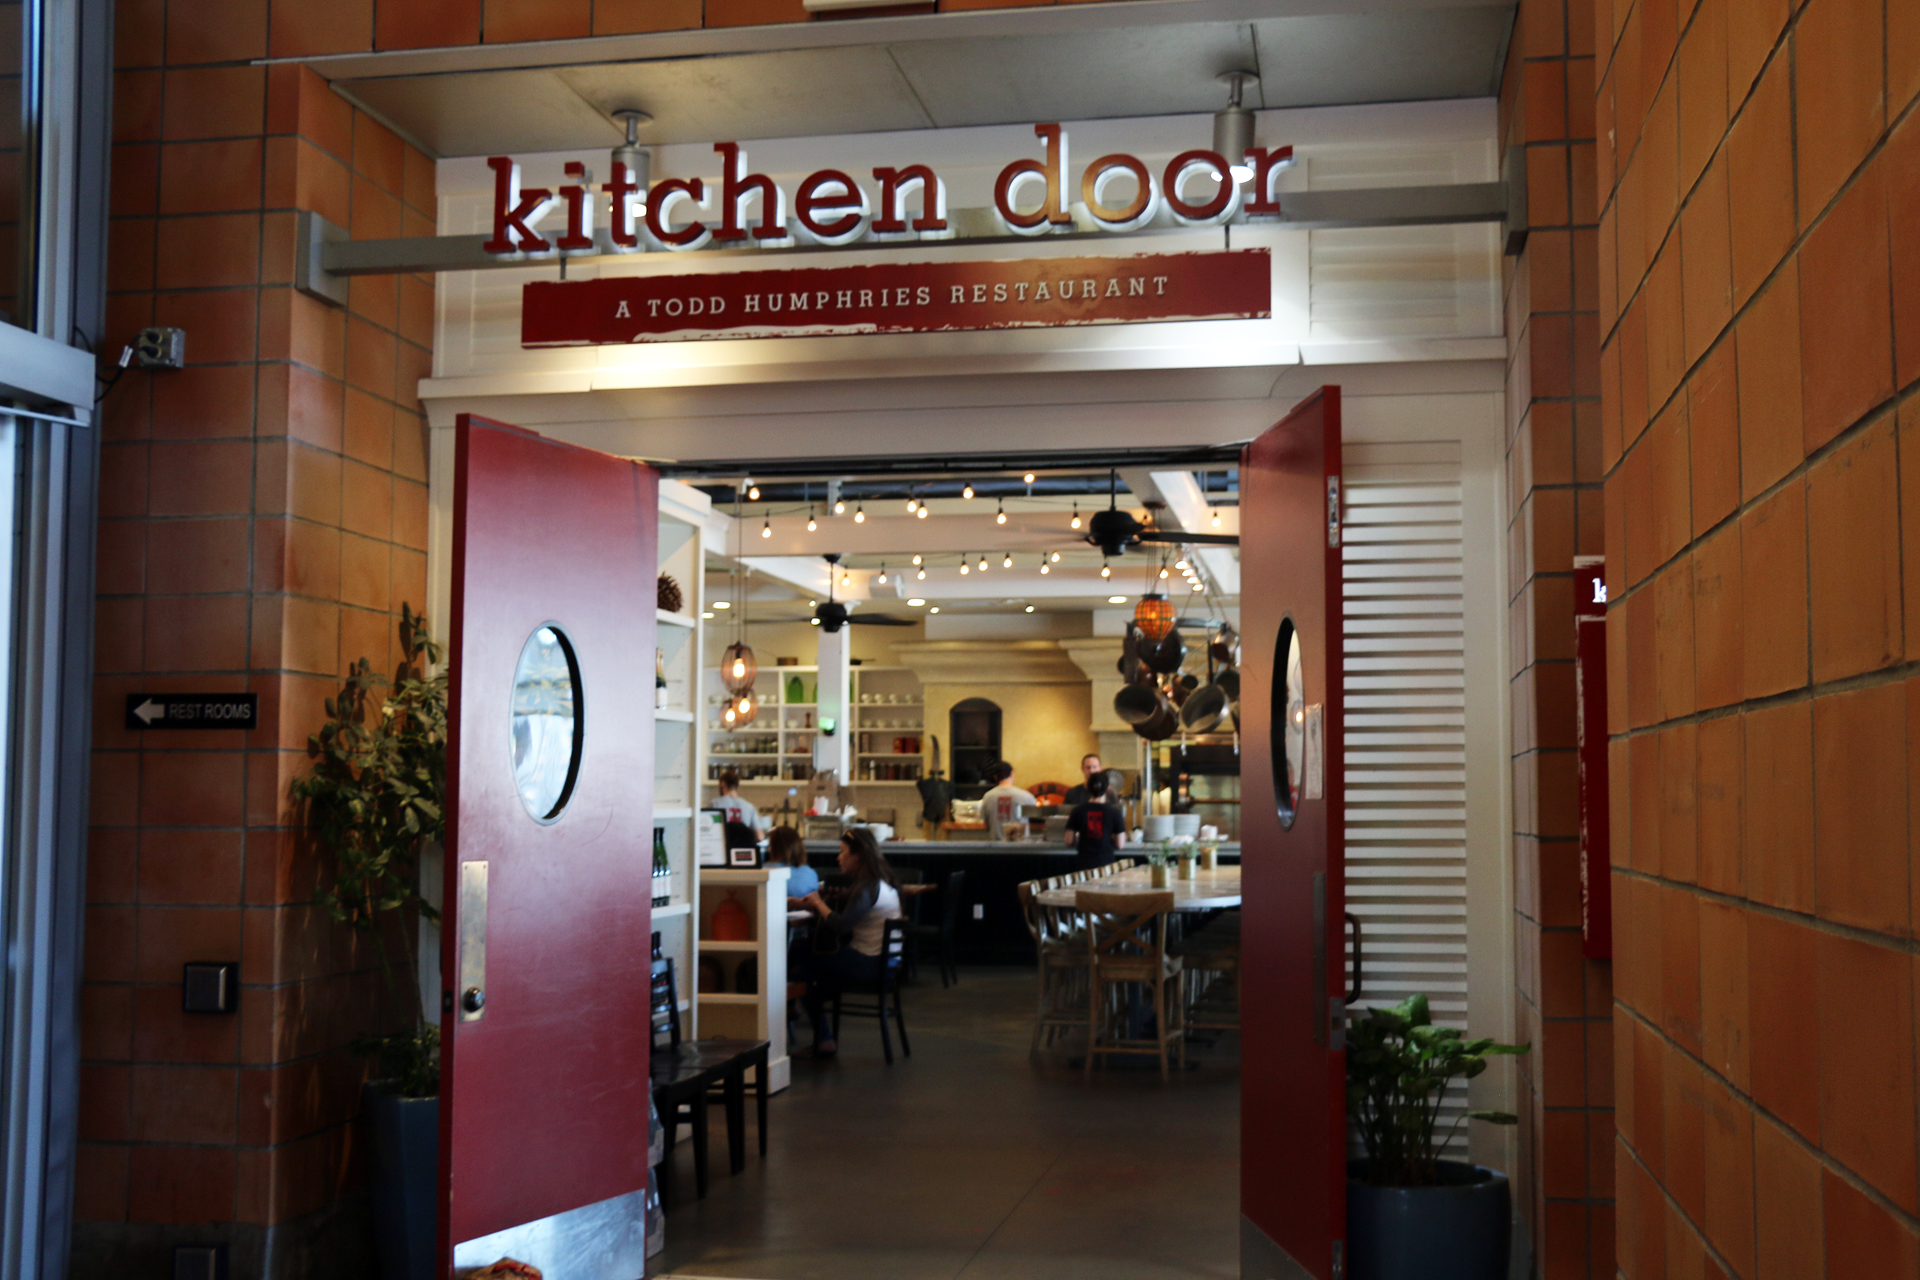 The Kitchen Door, a separate sit-down restaurant featuring chef Todd Humphries’ locally inspired cooking.